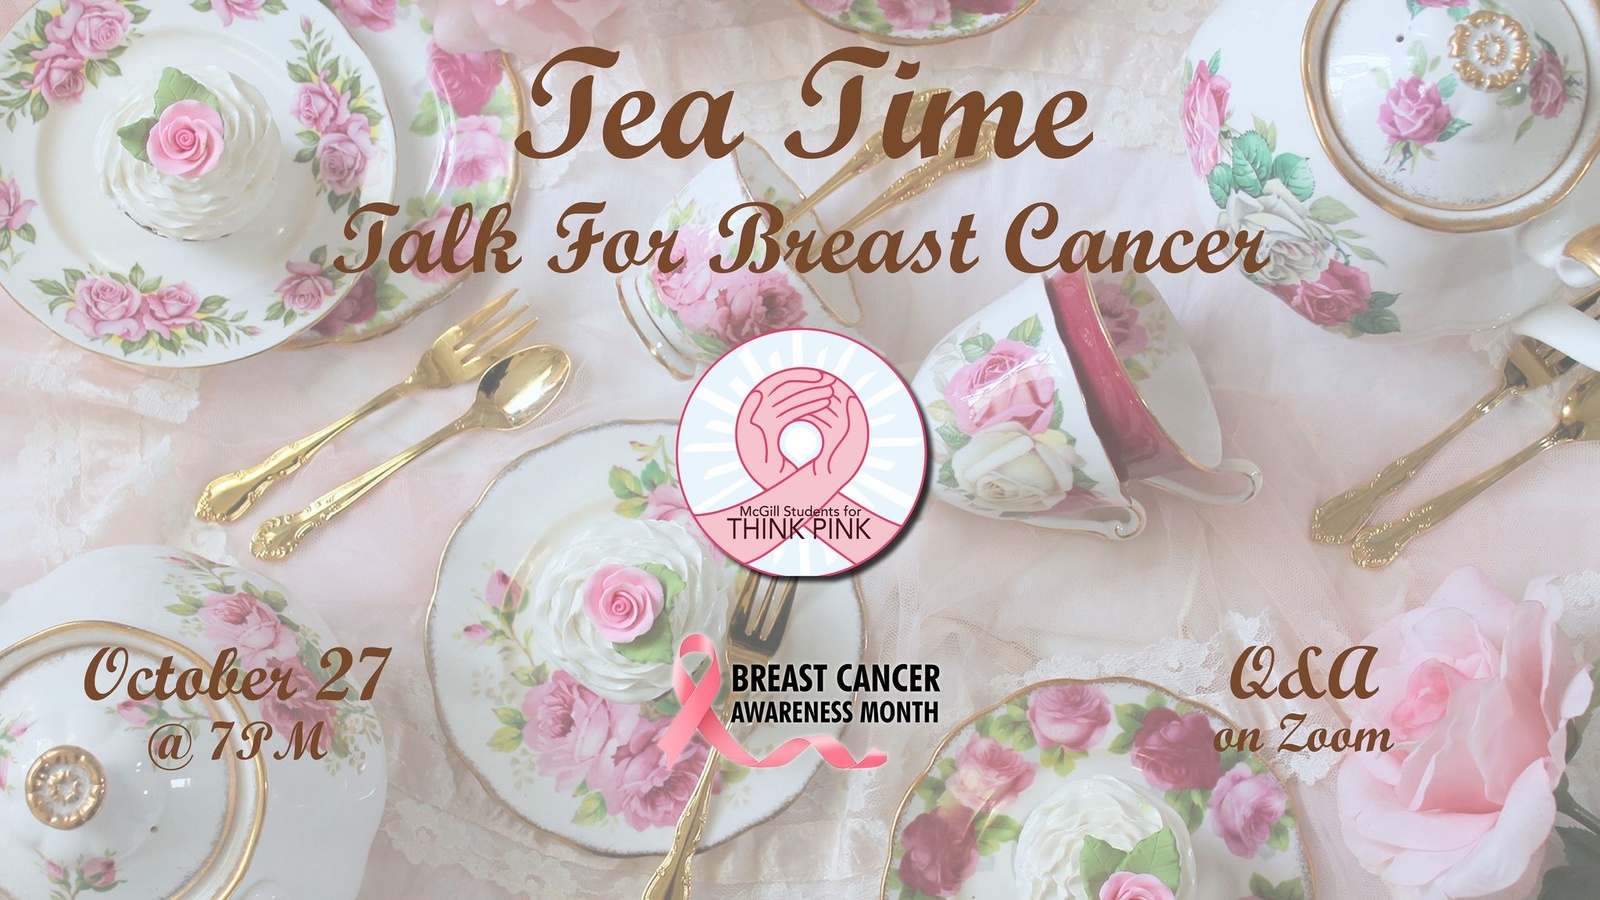 Tea Time Talk for Breast Cancer